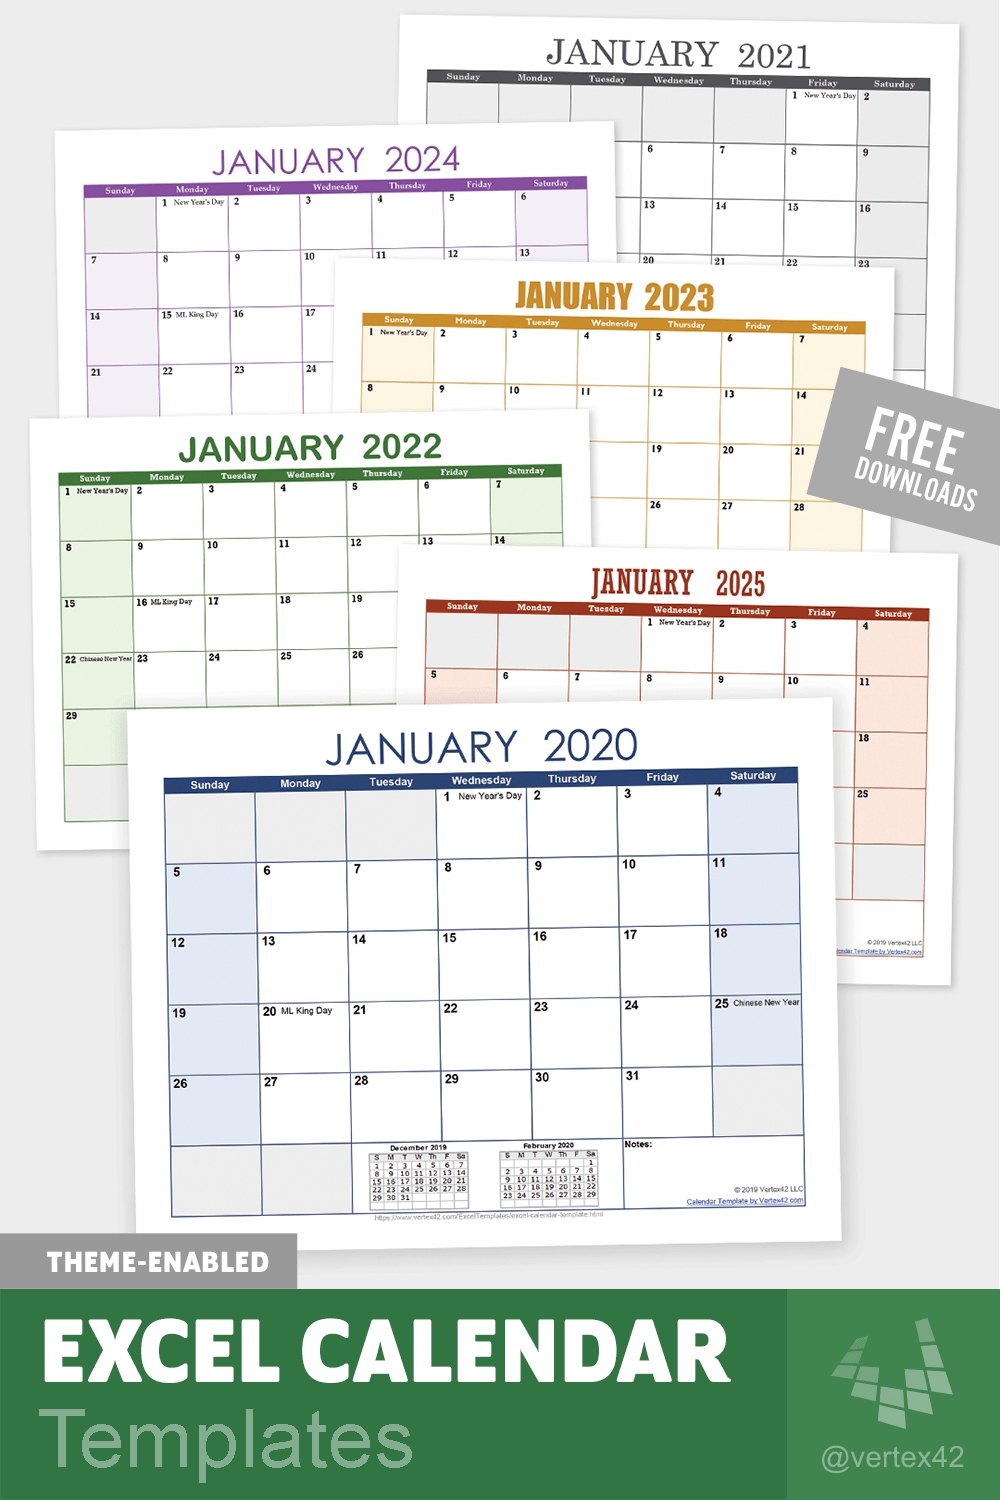 Excel Calendar Templates | Excel Calendar Template, Excel